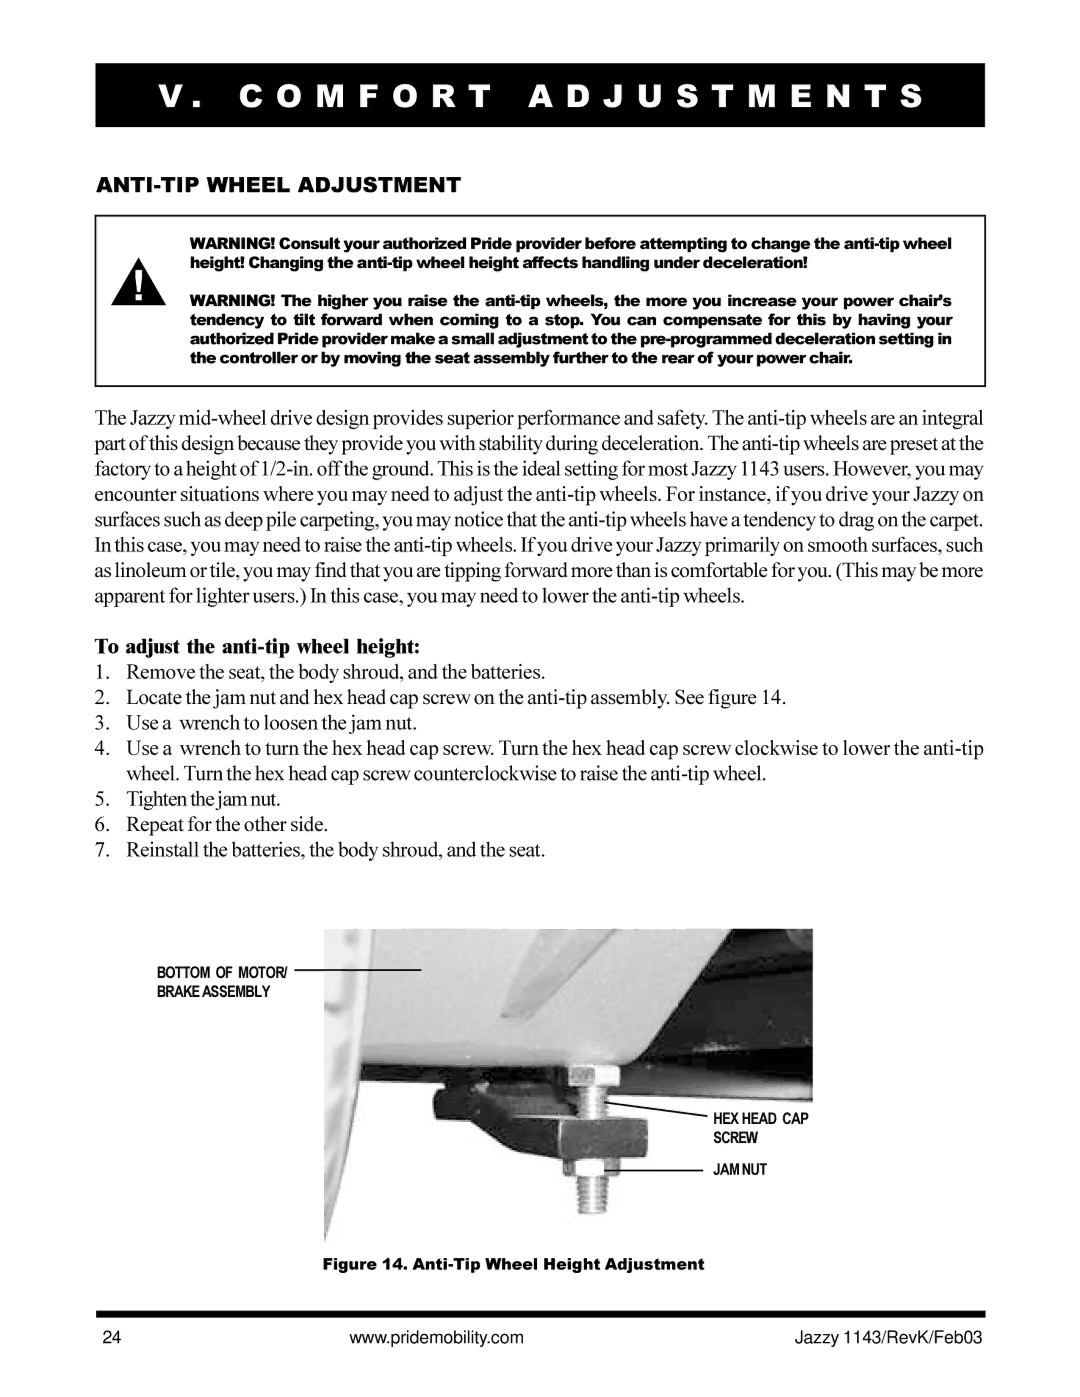 Pride Mobility Jazzy 1143 owner manual ANTI-TIP Wheel Adjustment, To adjust the anti-tip wheel height 